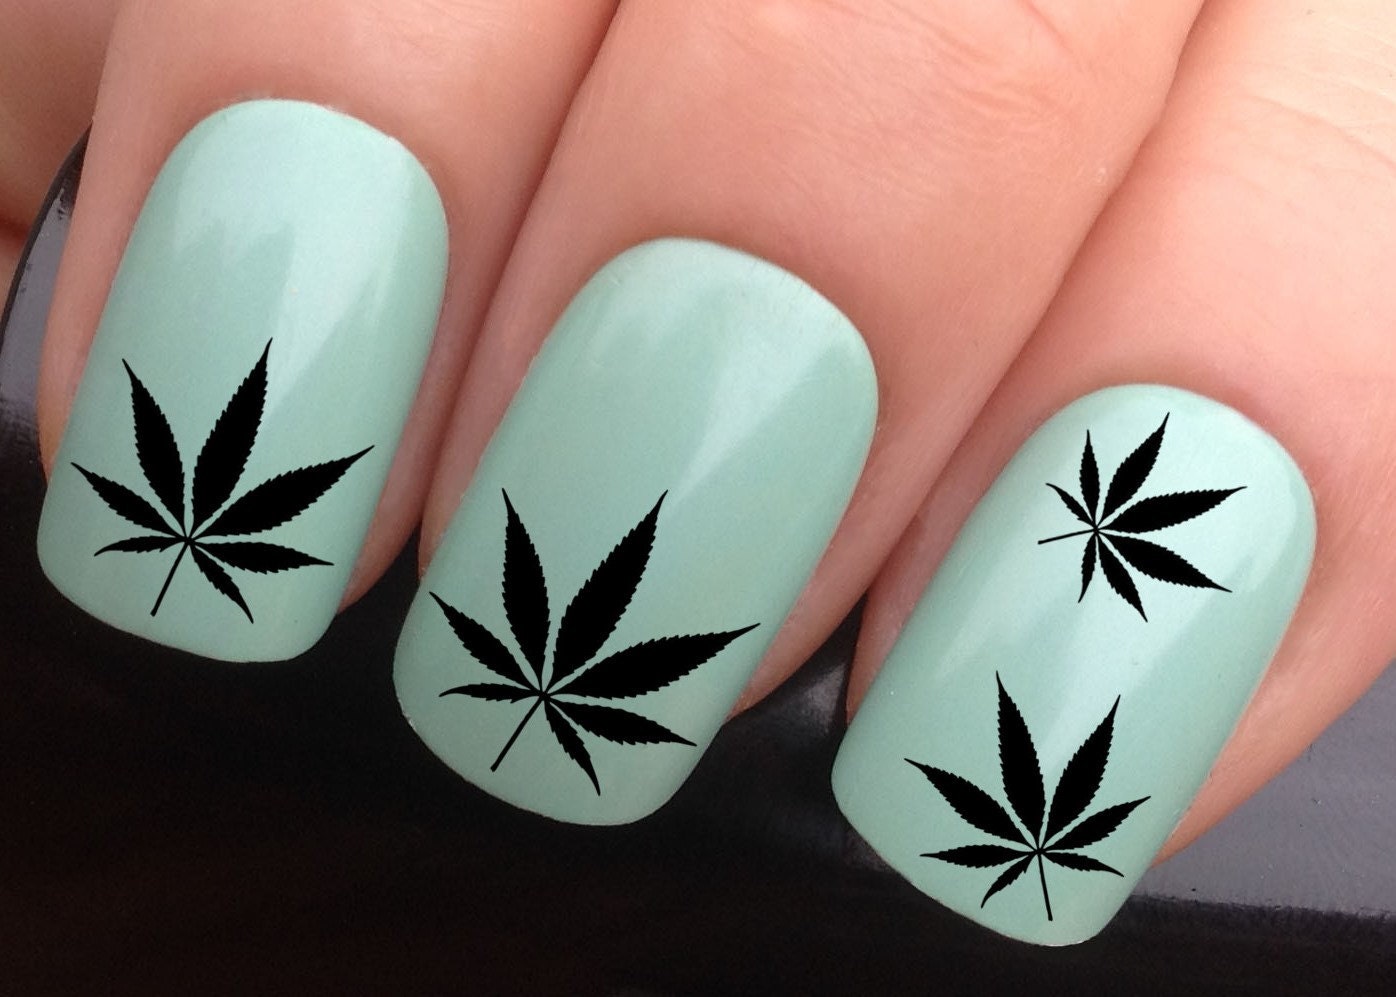 10. "Stiletto Nails with Weed Leaf Decals" - wide 1